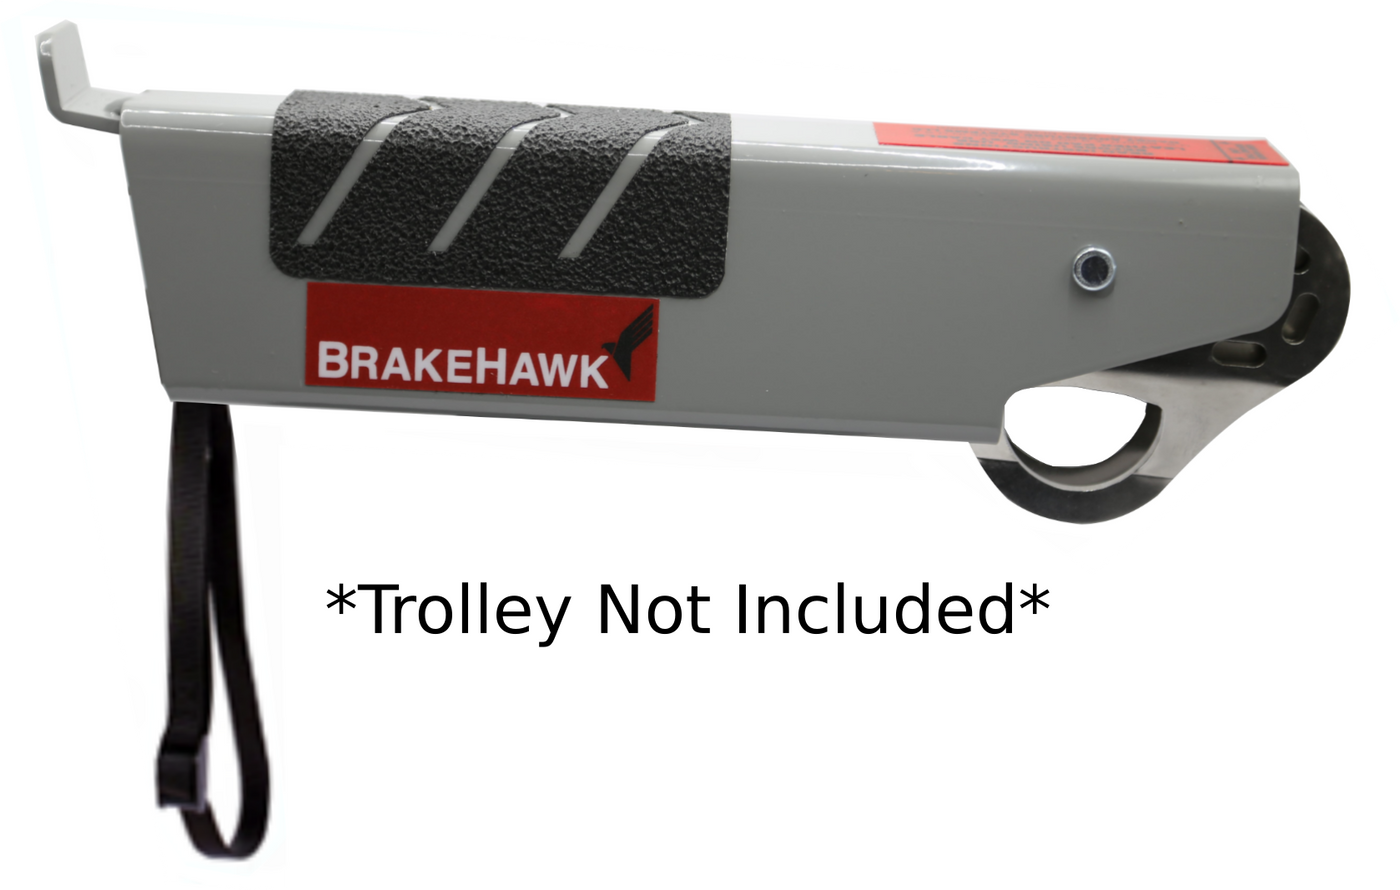 Brake Hawk 404 pictured with Tether and Trolley